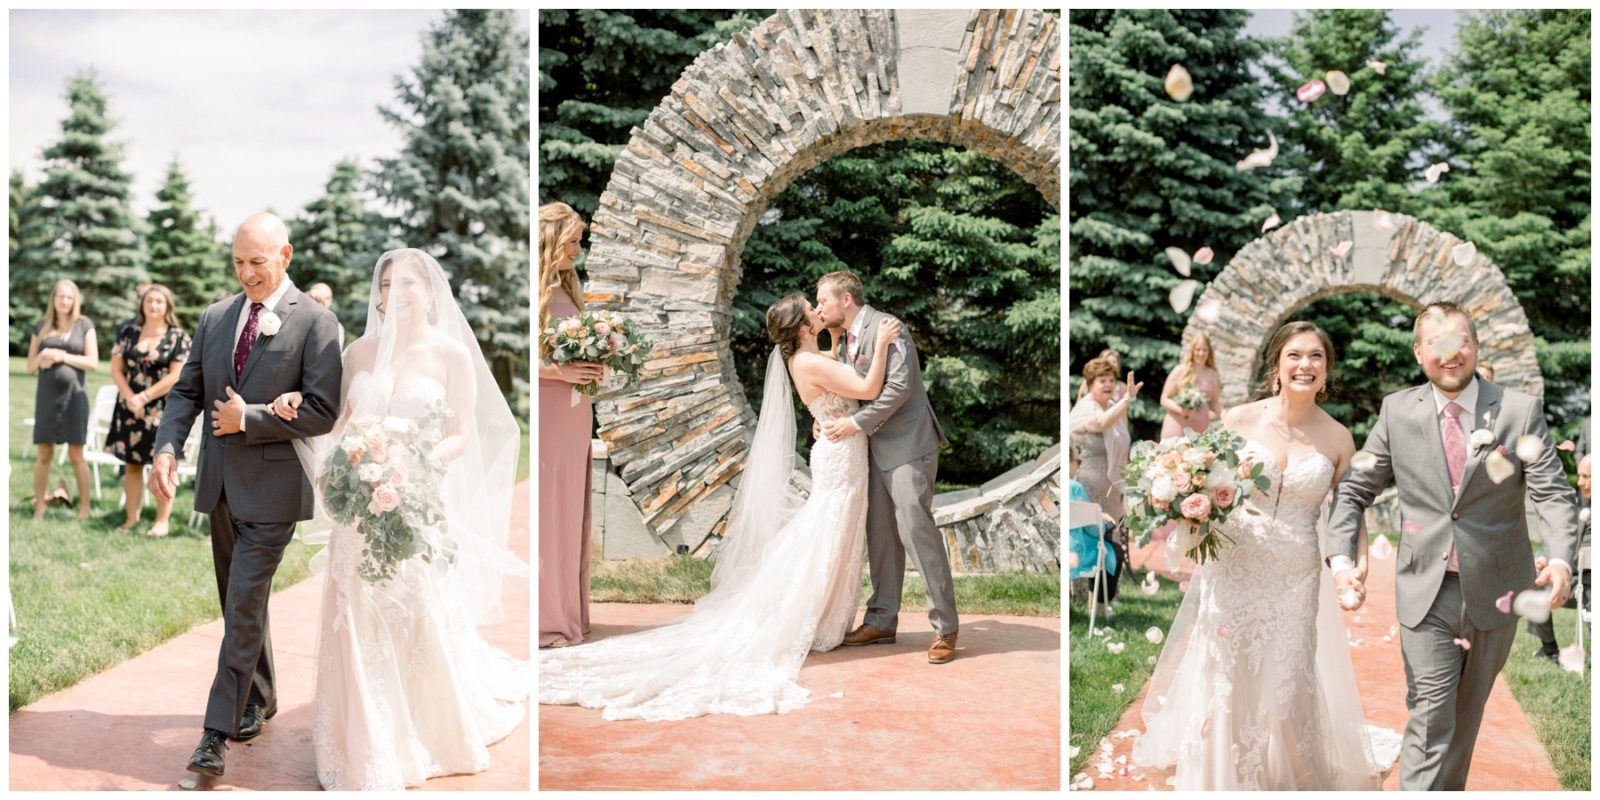 Three photos. One has the bride and her father walking down the aisle. The other shows the bride and groom kissing. The last one shows them walking and holding hands while petals are thrown at them.